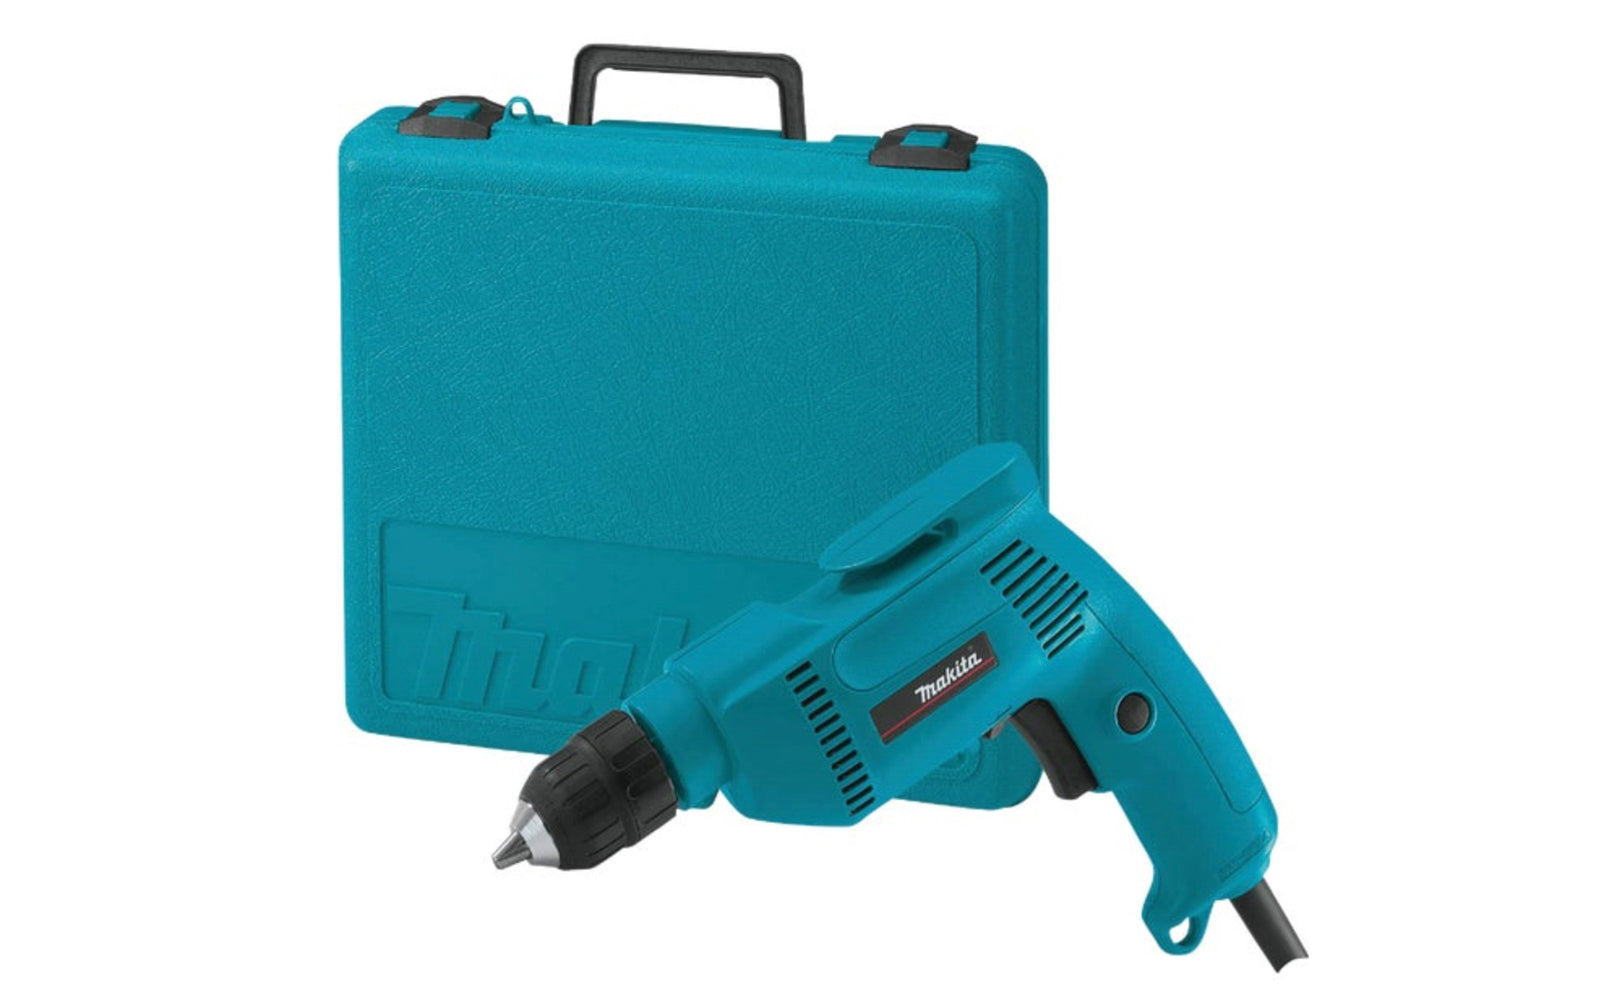 Assembled in USA - Makita 3/8" 4.9-Amp Keyless Electric Drill with Case. Model 6408K. 3/8" variable speed 0 to 2500 RPM reversible. 4.9A motor. Includes hard plastic case. 088381024570. USA Makita drill.